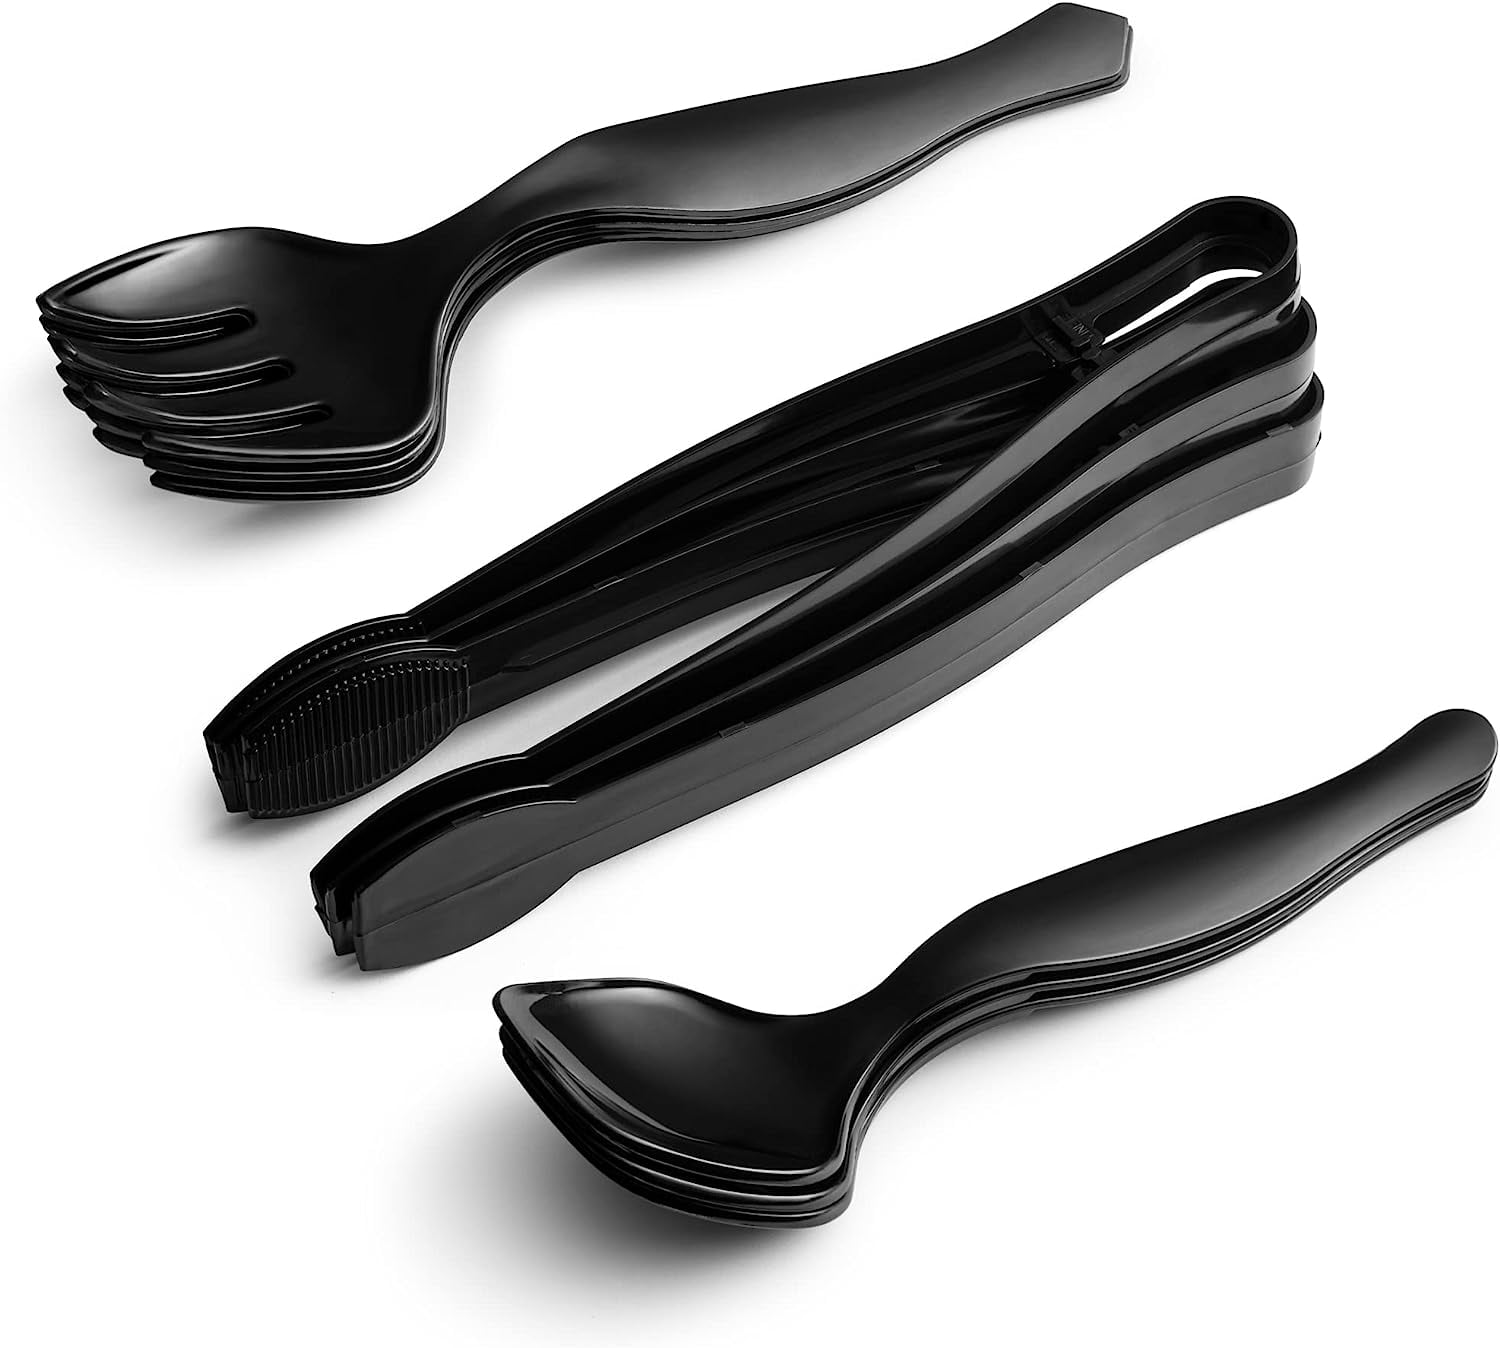 EcoQuality Set of 3 - Heavy Duty Black Serving Tongs - 12 inch - Plastic Disposable Salad Tongs - High Heat Plastic, Catering, Salads, Bakery, Buffets, BBQ